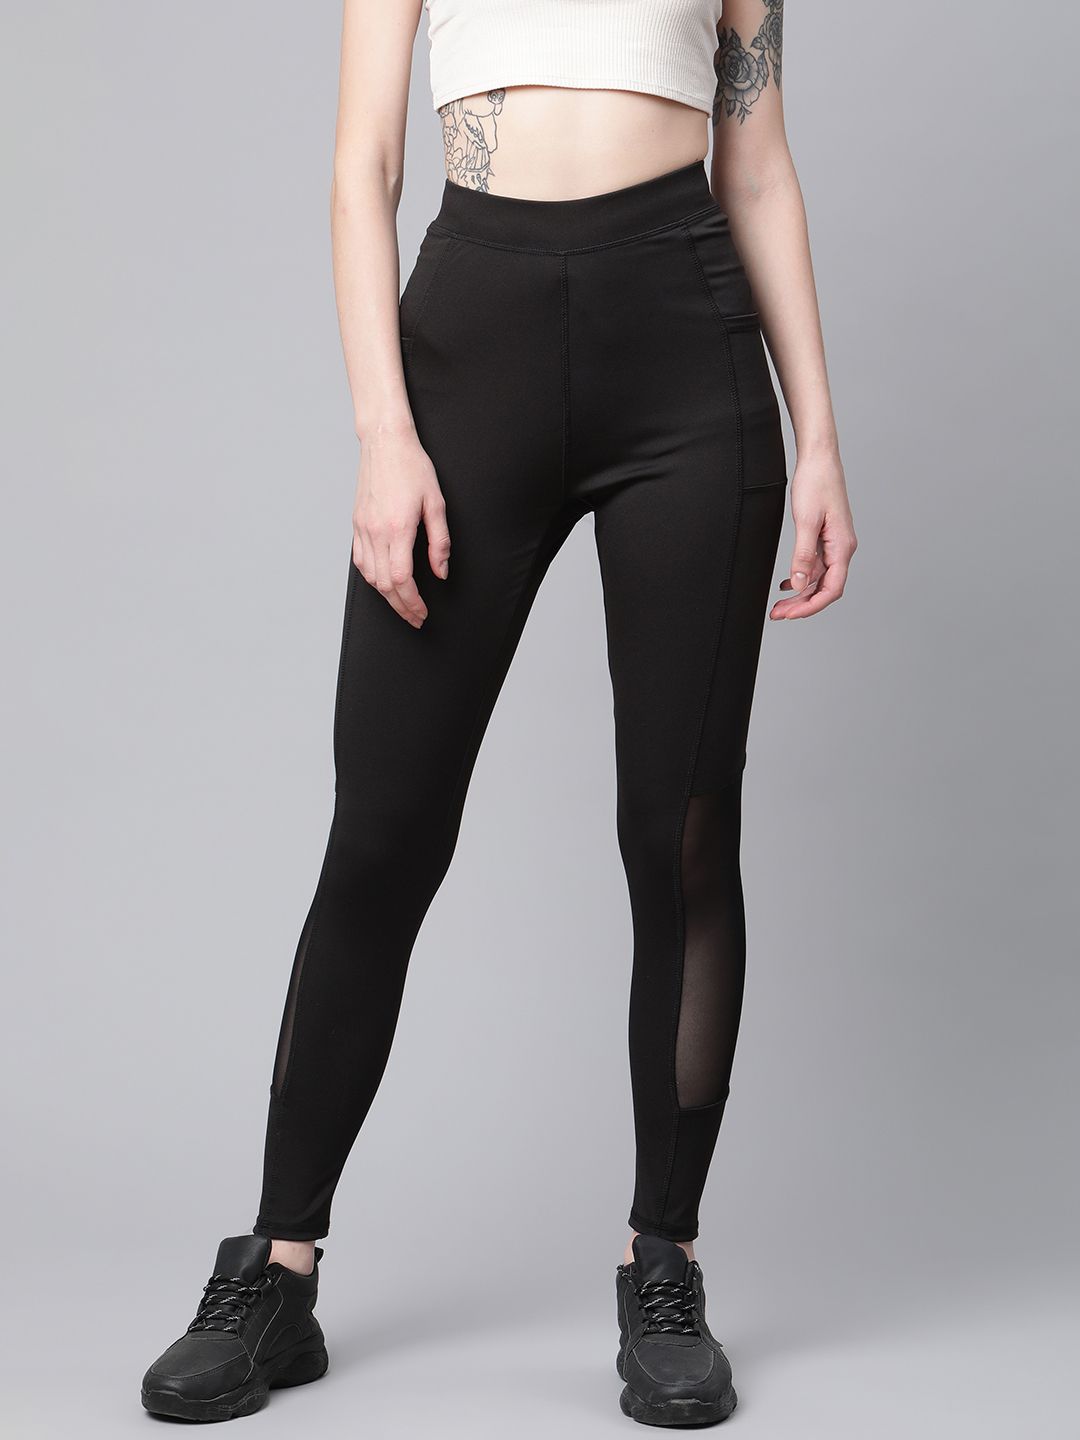 Blinkin Women Black Semi-Sheer Mesh Tights with Side Pockets Price in India